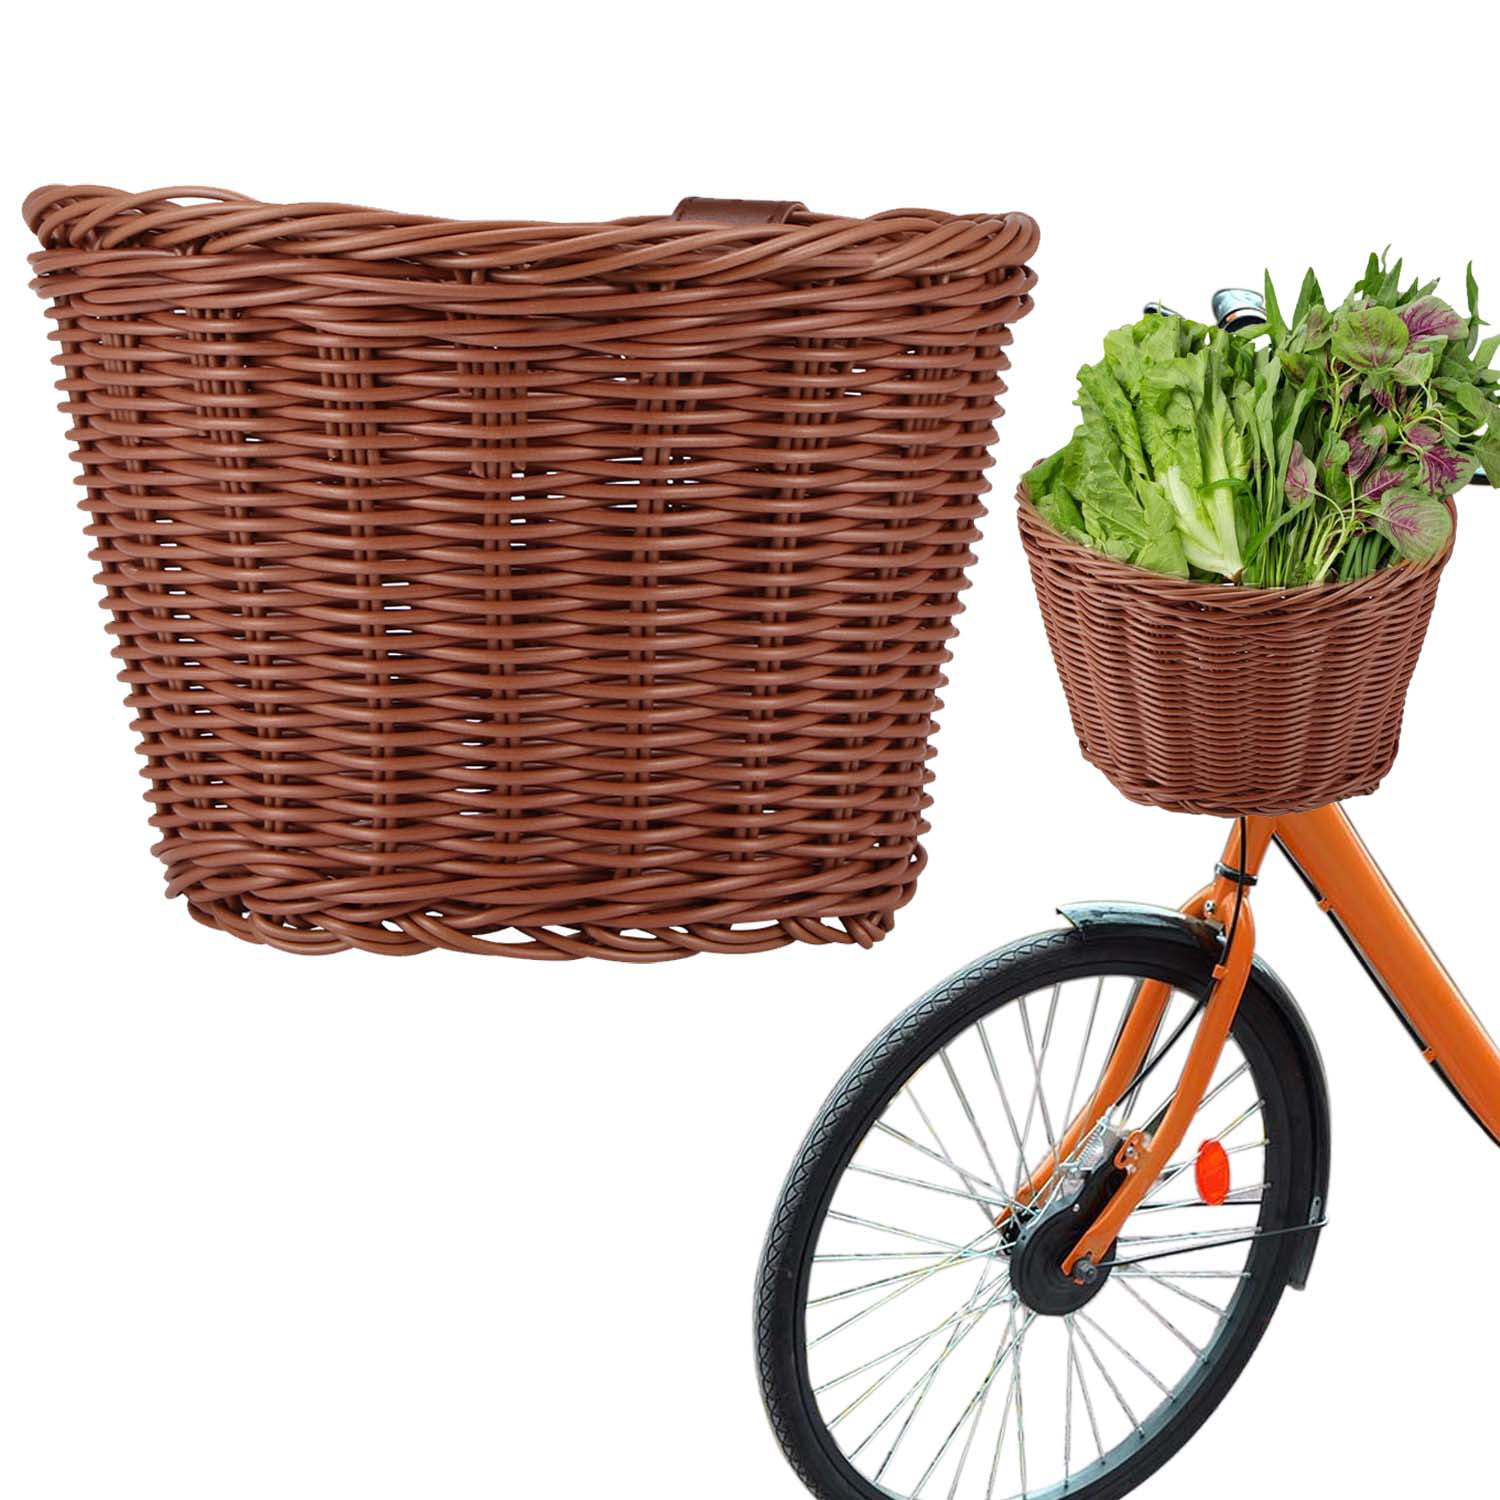 Water Resistant Bicycle Wicker Storage Basket with Leather Straps Front Handlebar Hand-Woven bike Basket Wicker D-Shaped Bike Basket universal Bike Accessories